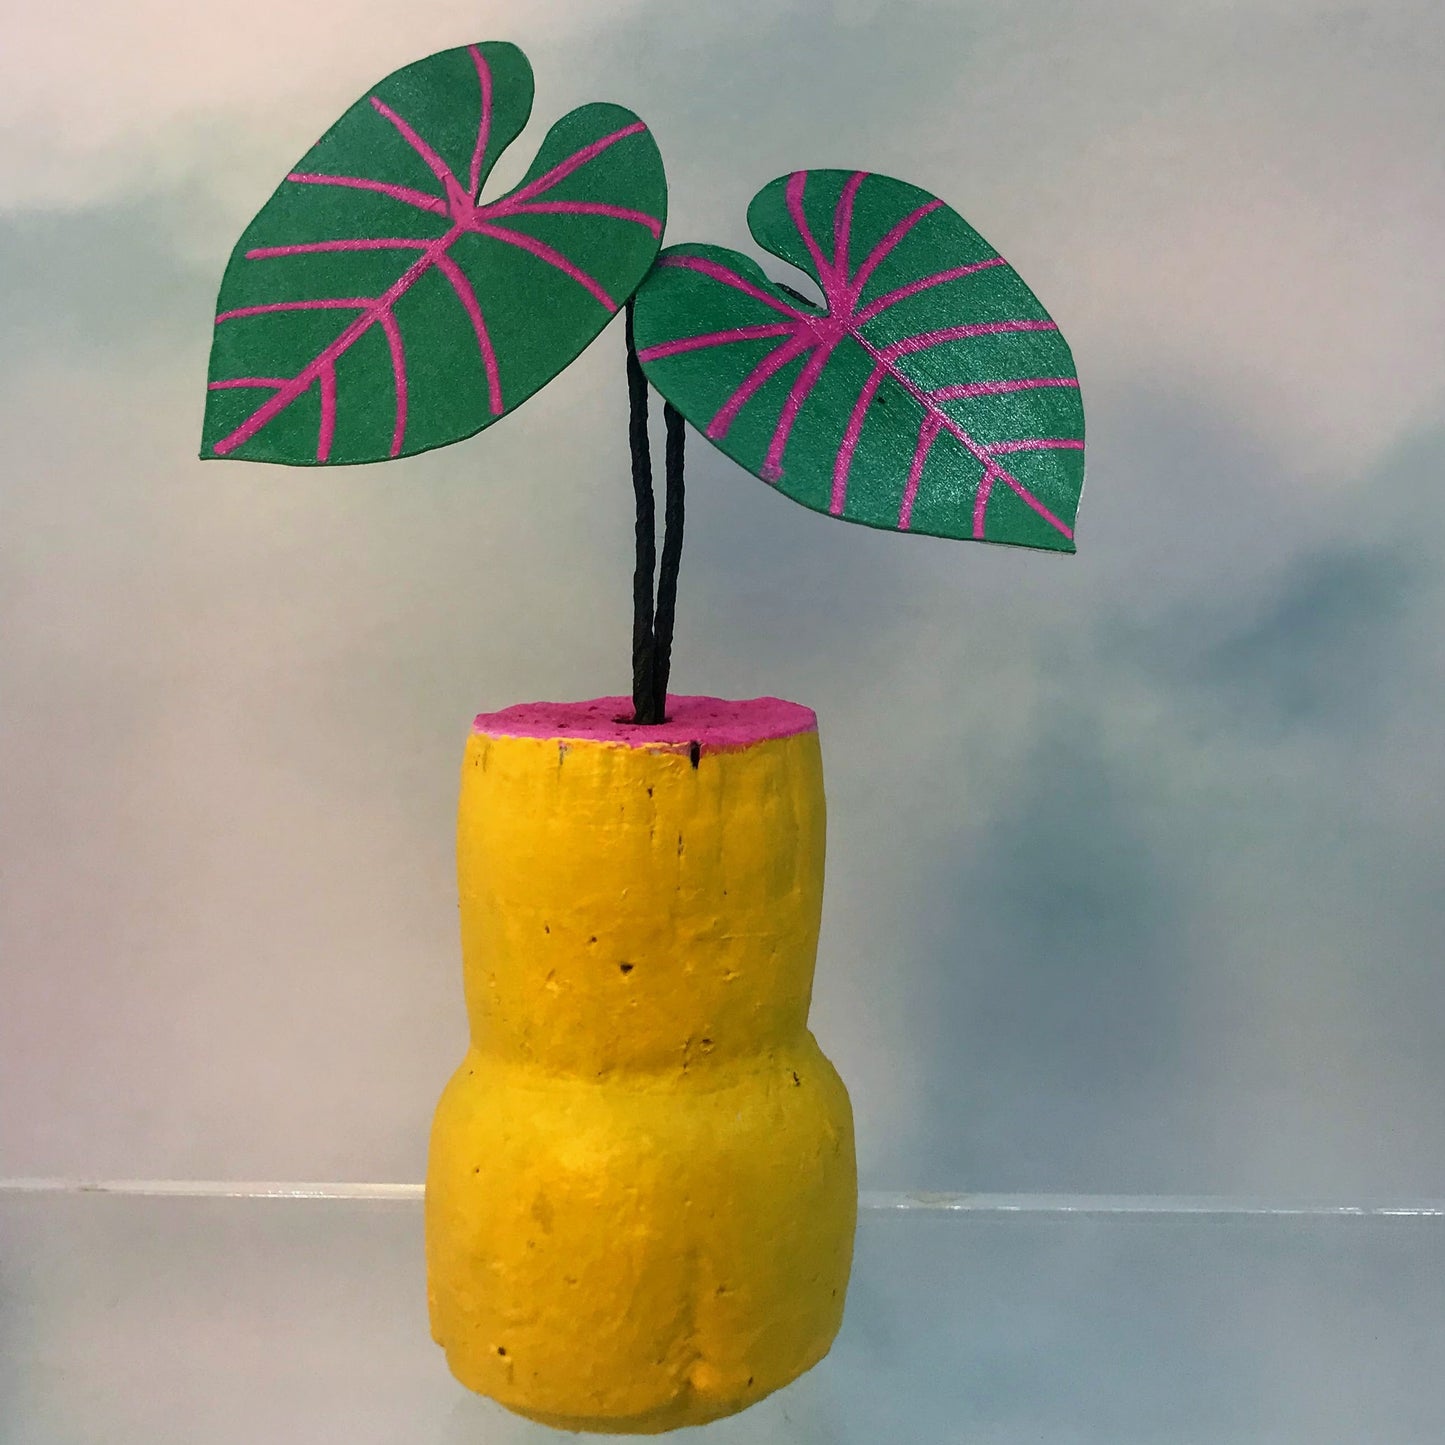 Tiny Magical Paper House Plant in Upcycled Painted Cork- DECORATIVE MAGNET